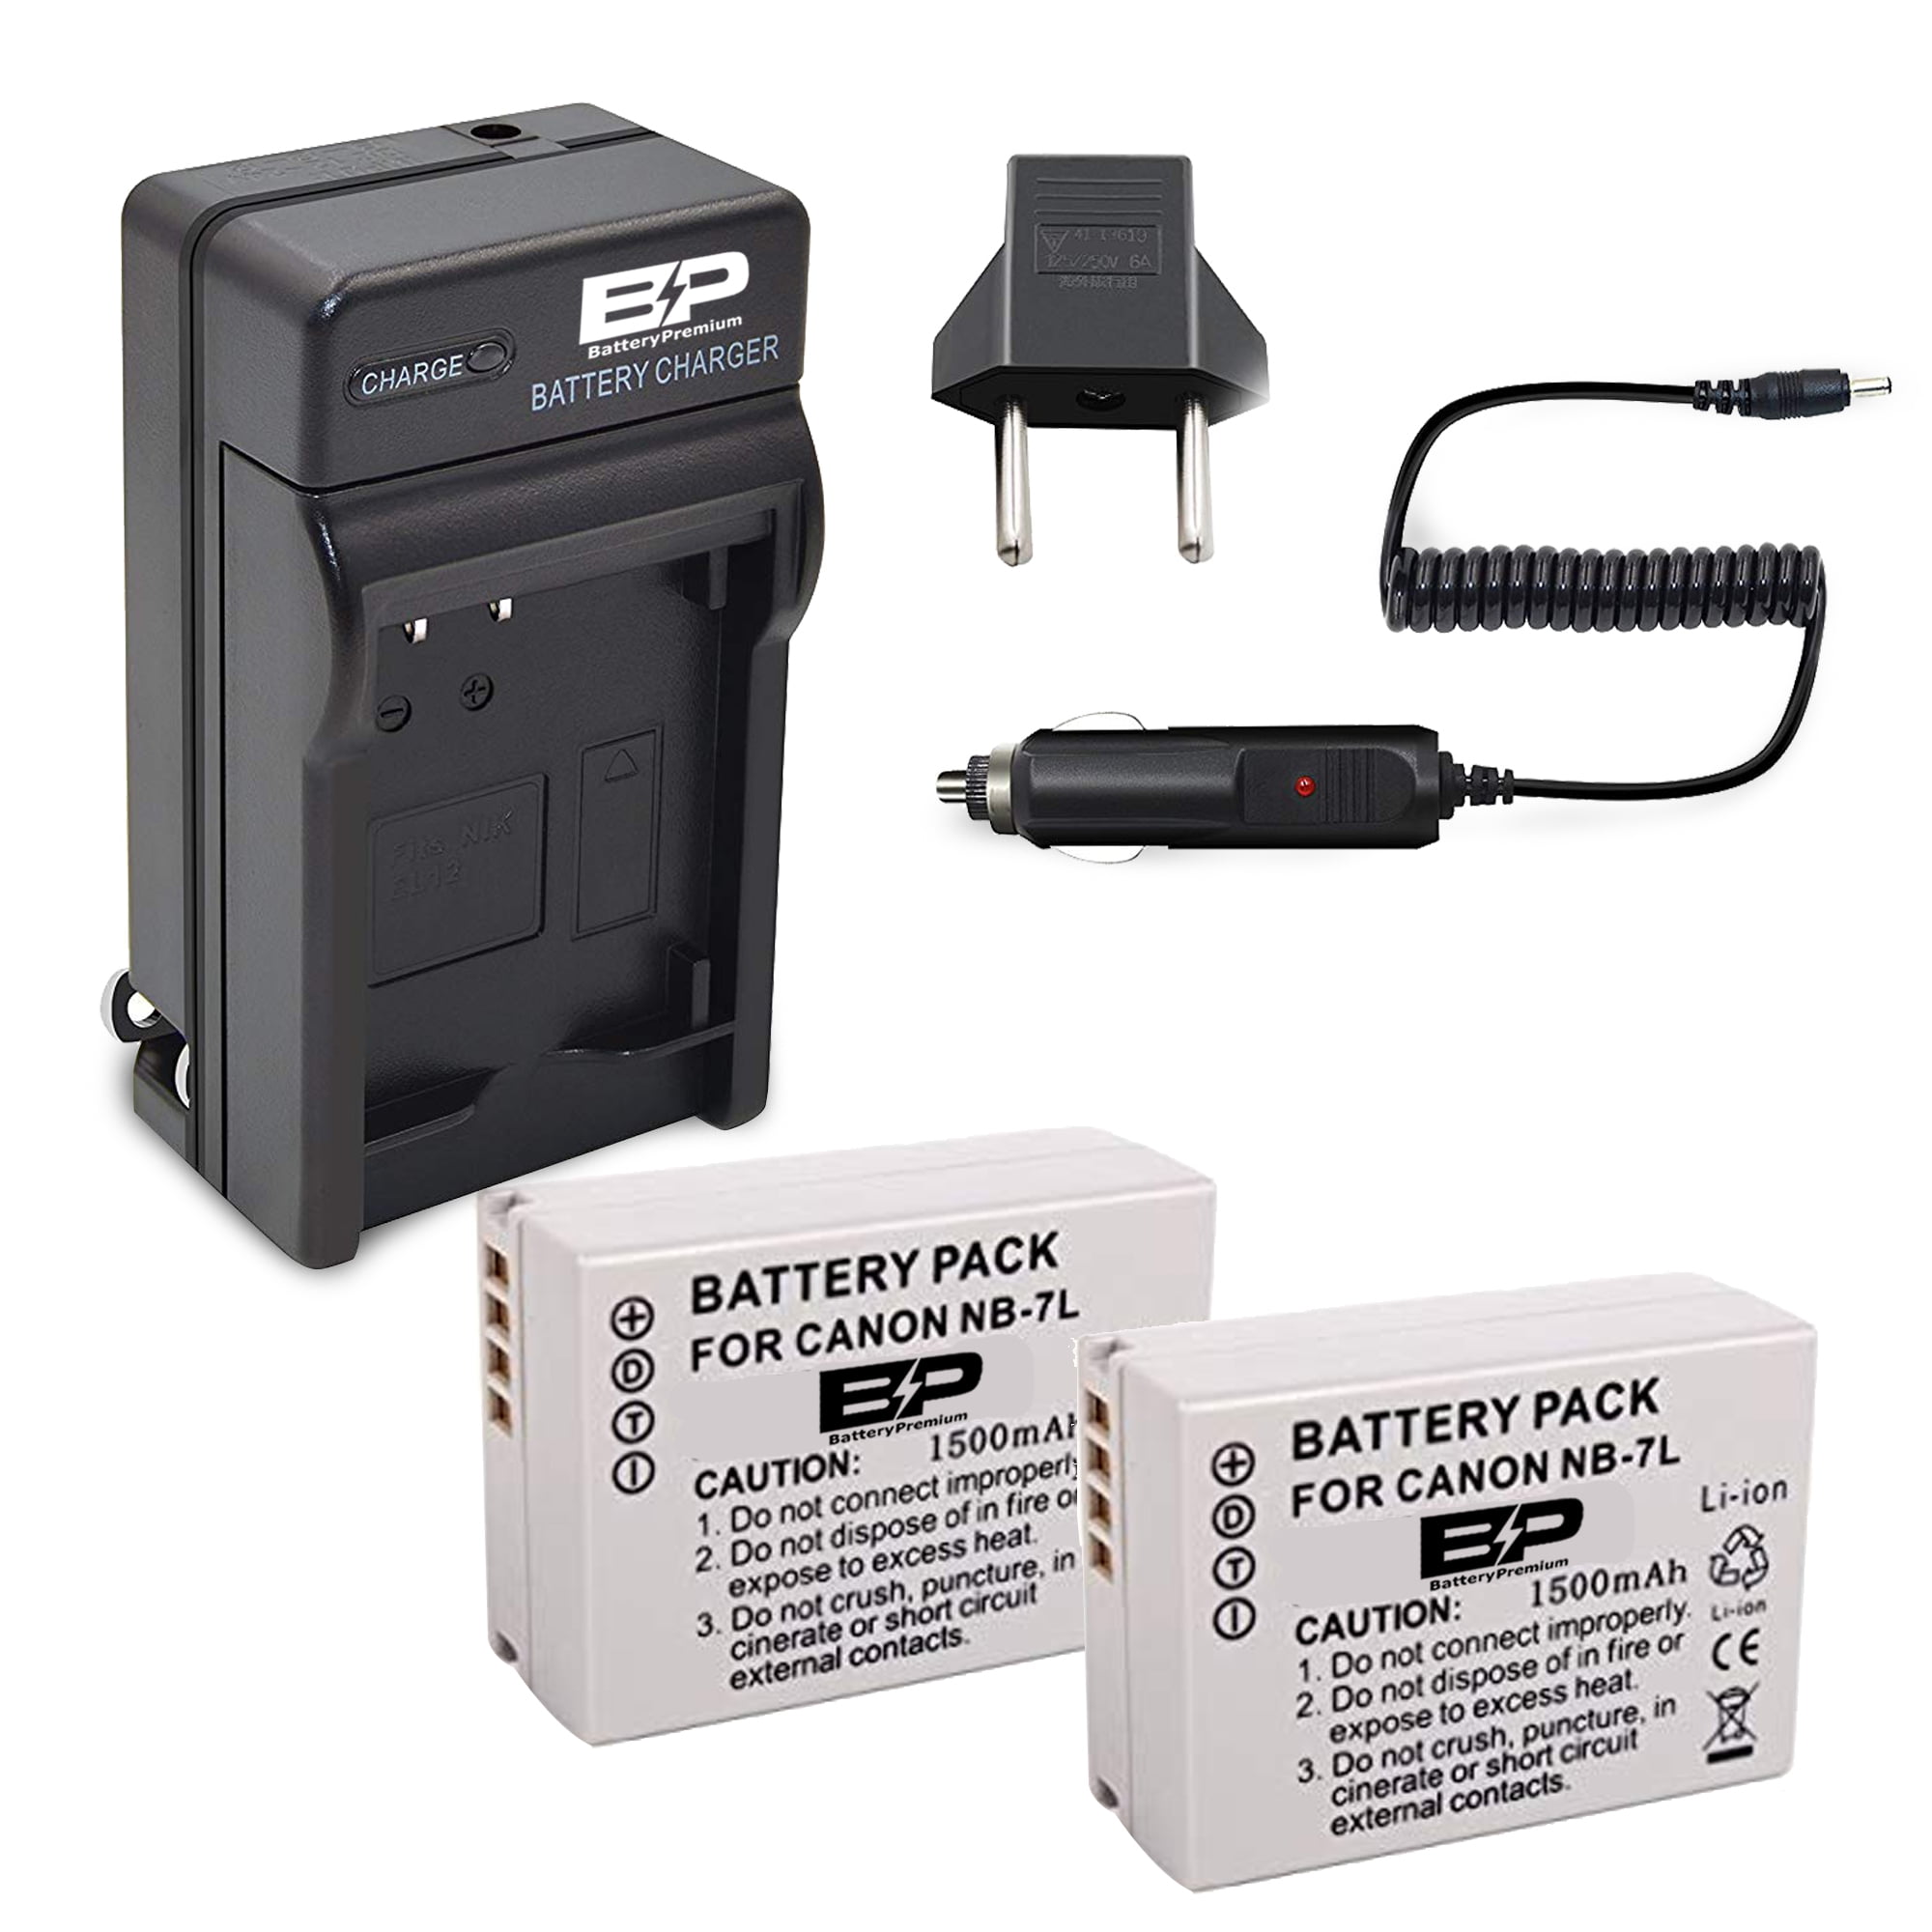 PowerShot G11 PowerShot SX30 is PowerShot G12 Replacement for CB-2LZE Charger NB-7L Battery Charger for Canon PowerShot G10 